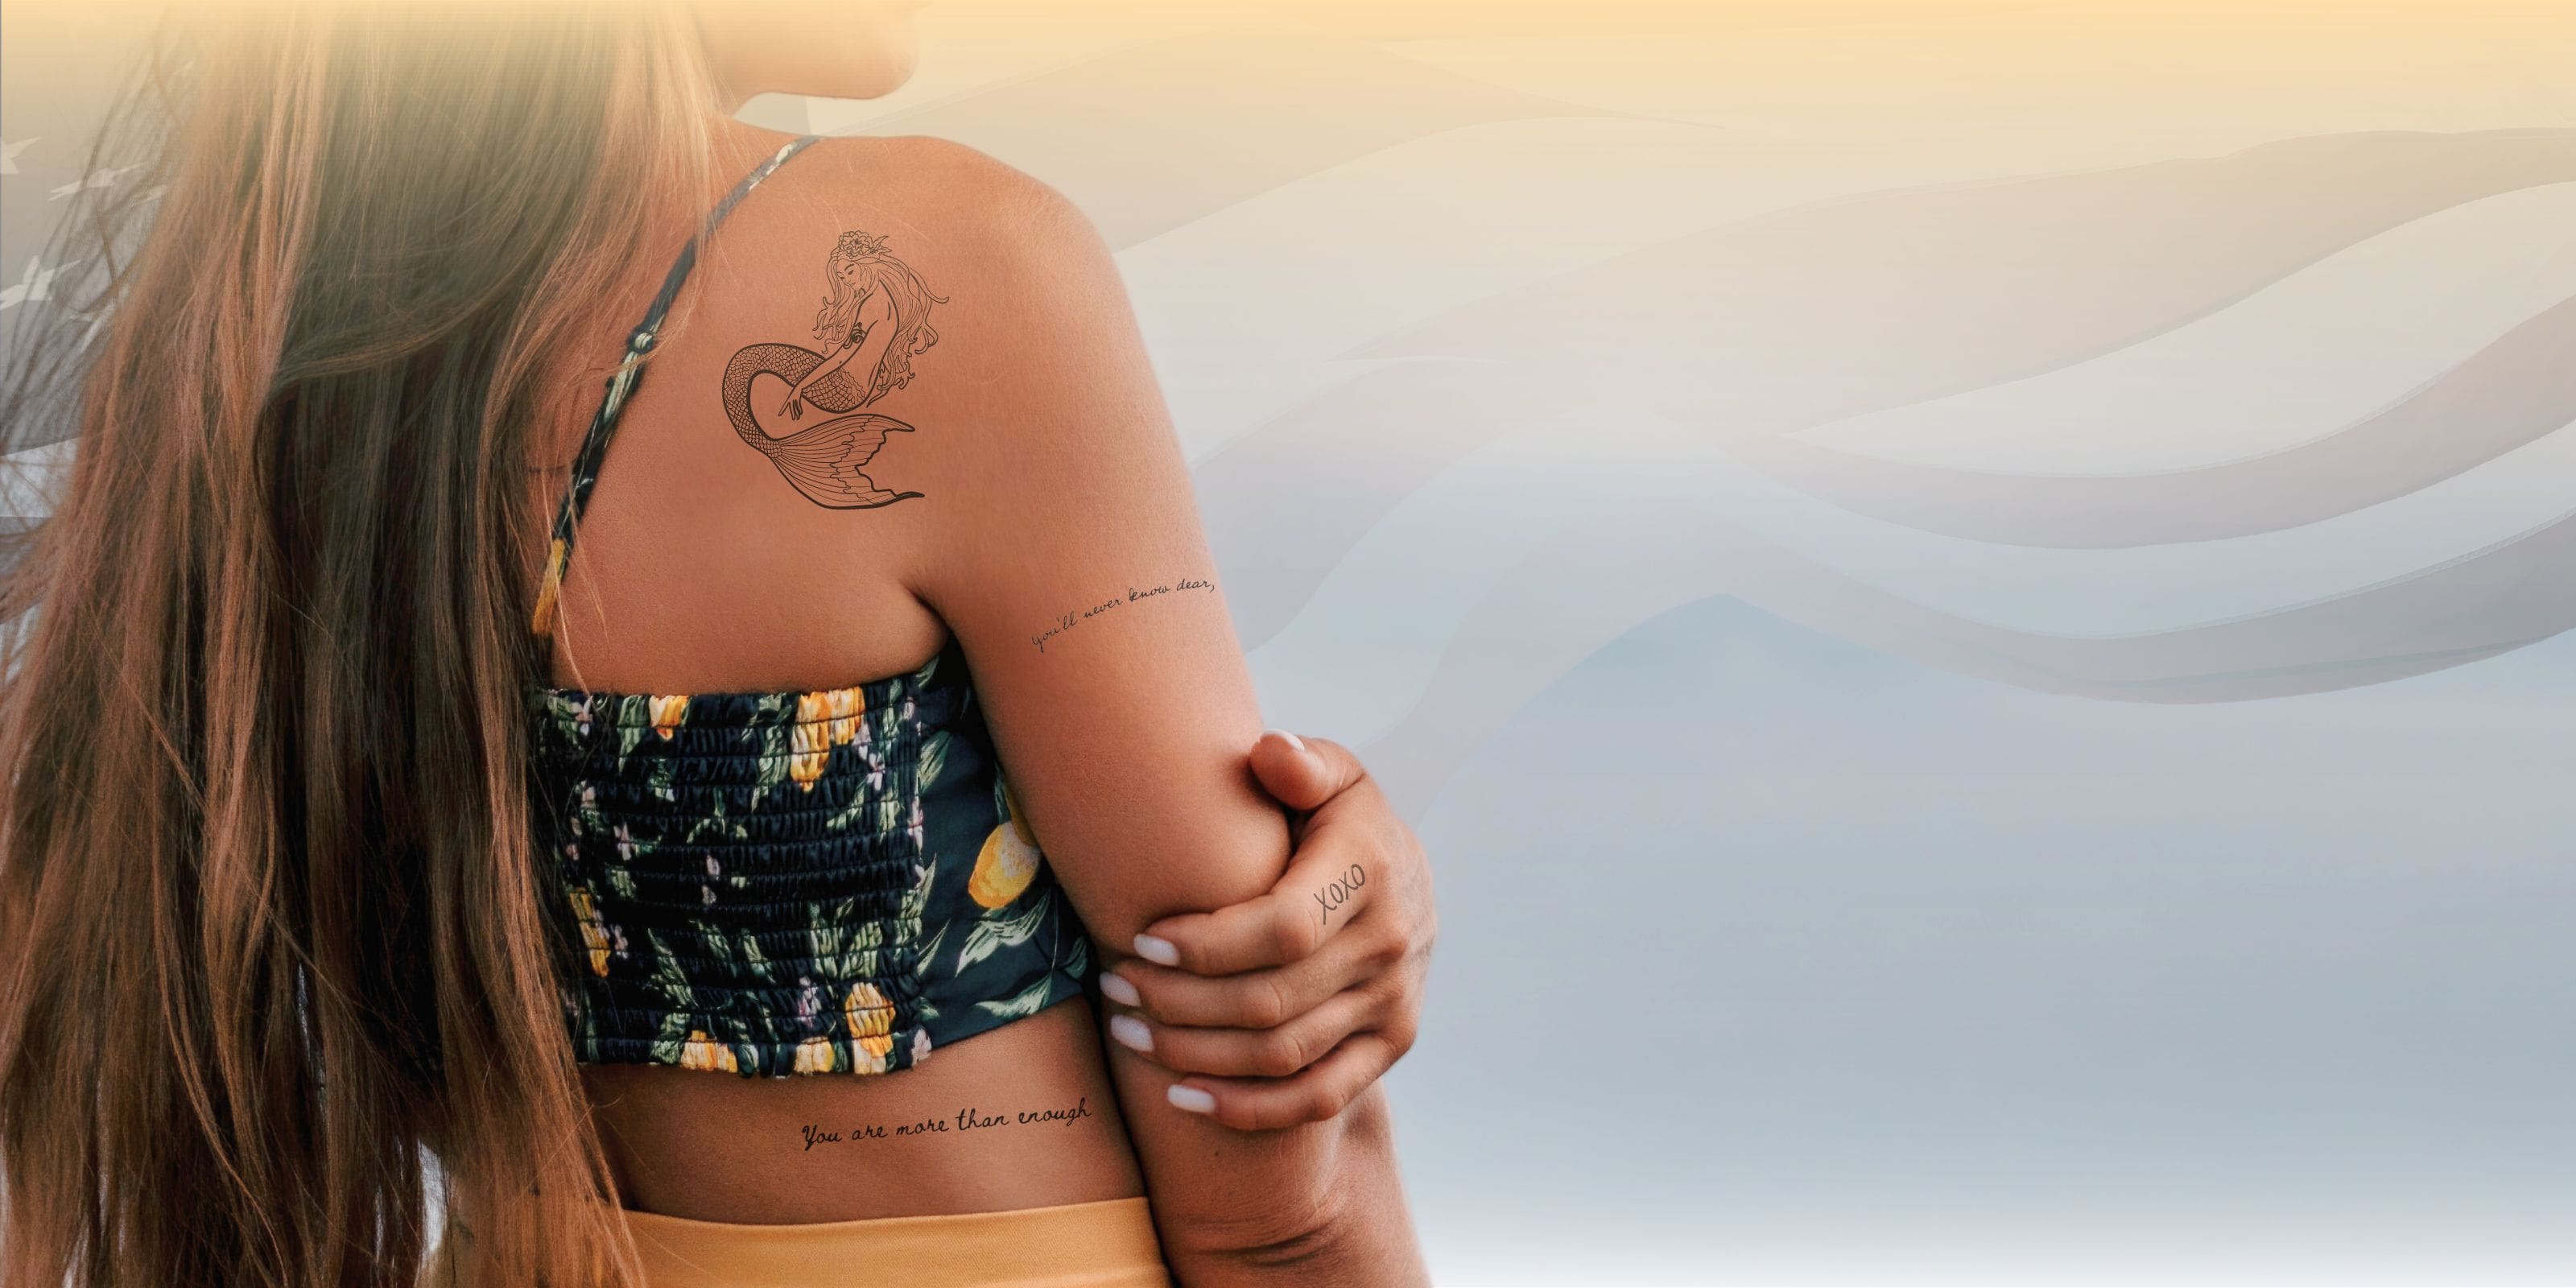 30 Best Name Tattoo Ideas You Should Check